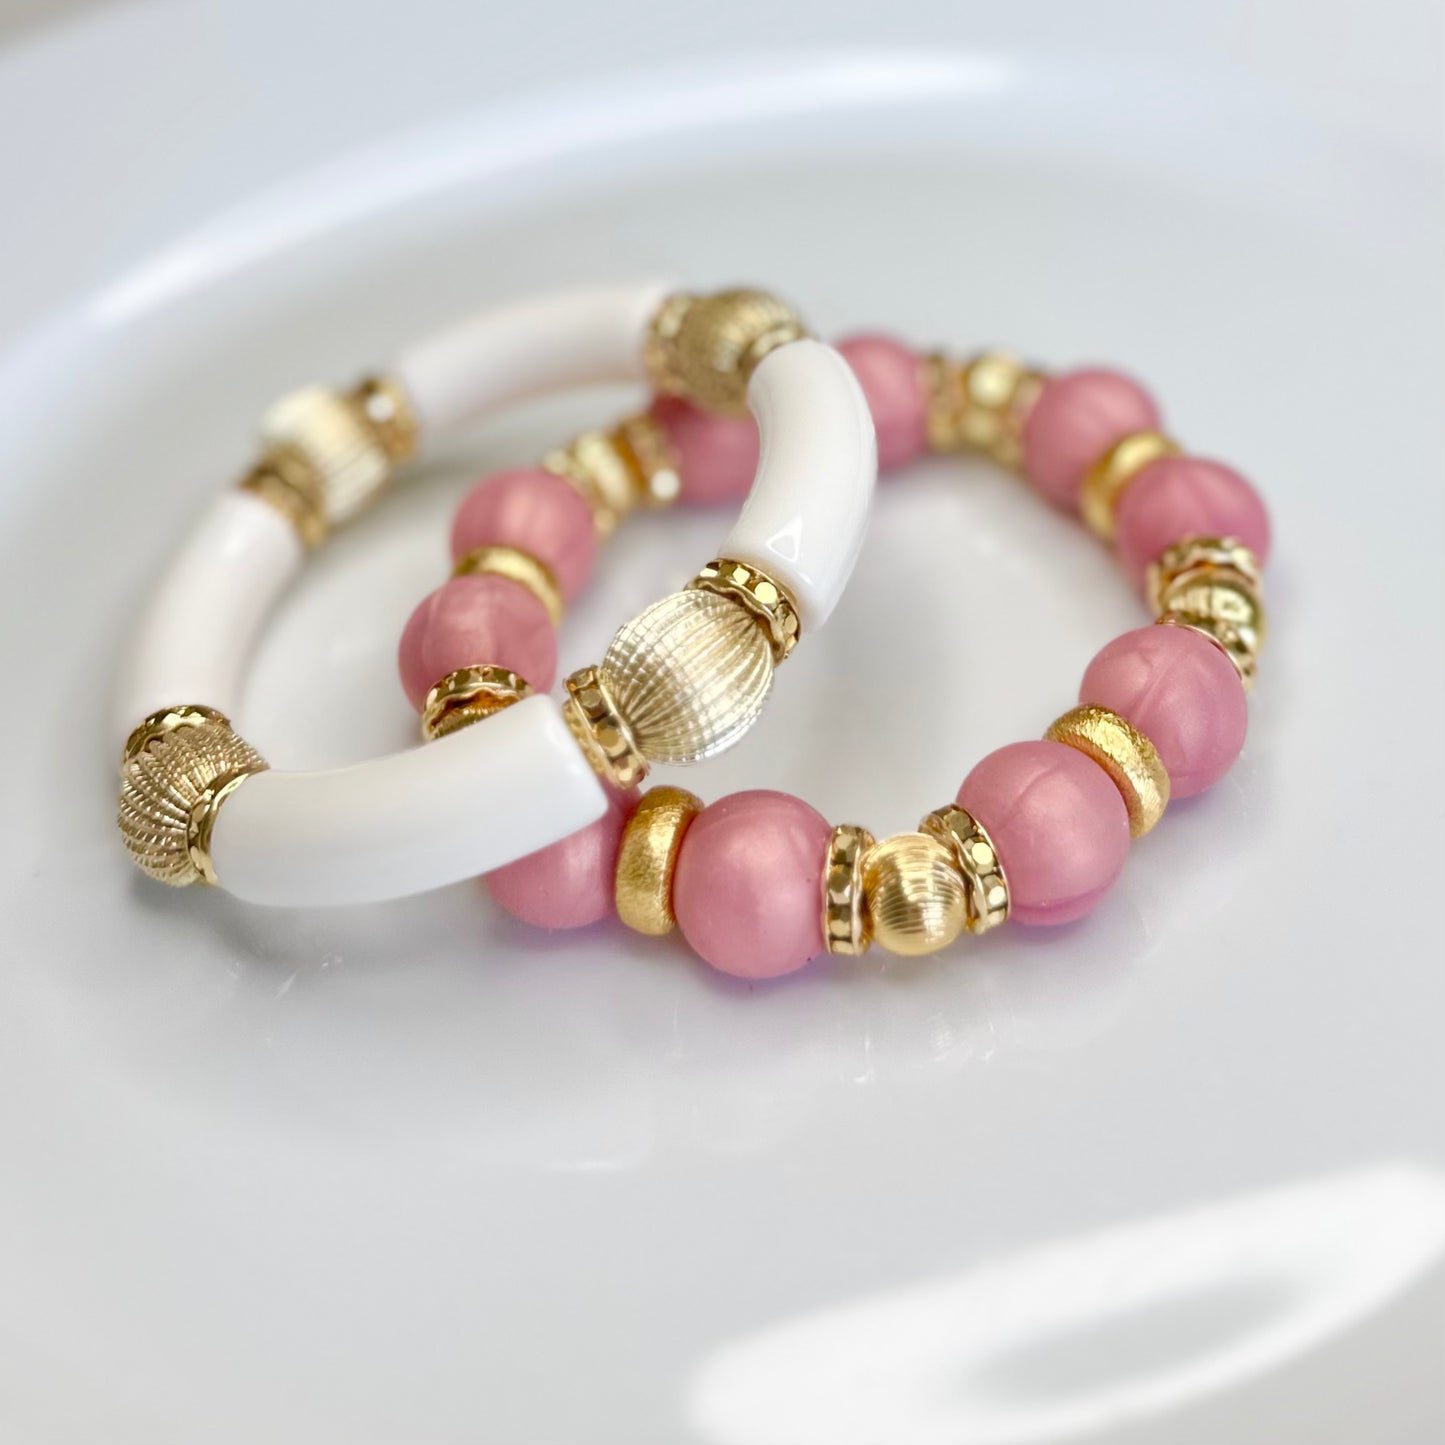 PEARLIZED ROSE PINK AND GOLD BANGLE WITH CZ ACCENTS